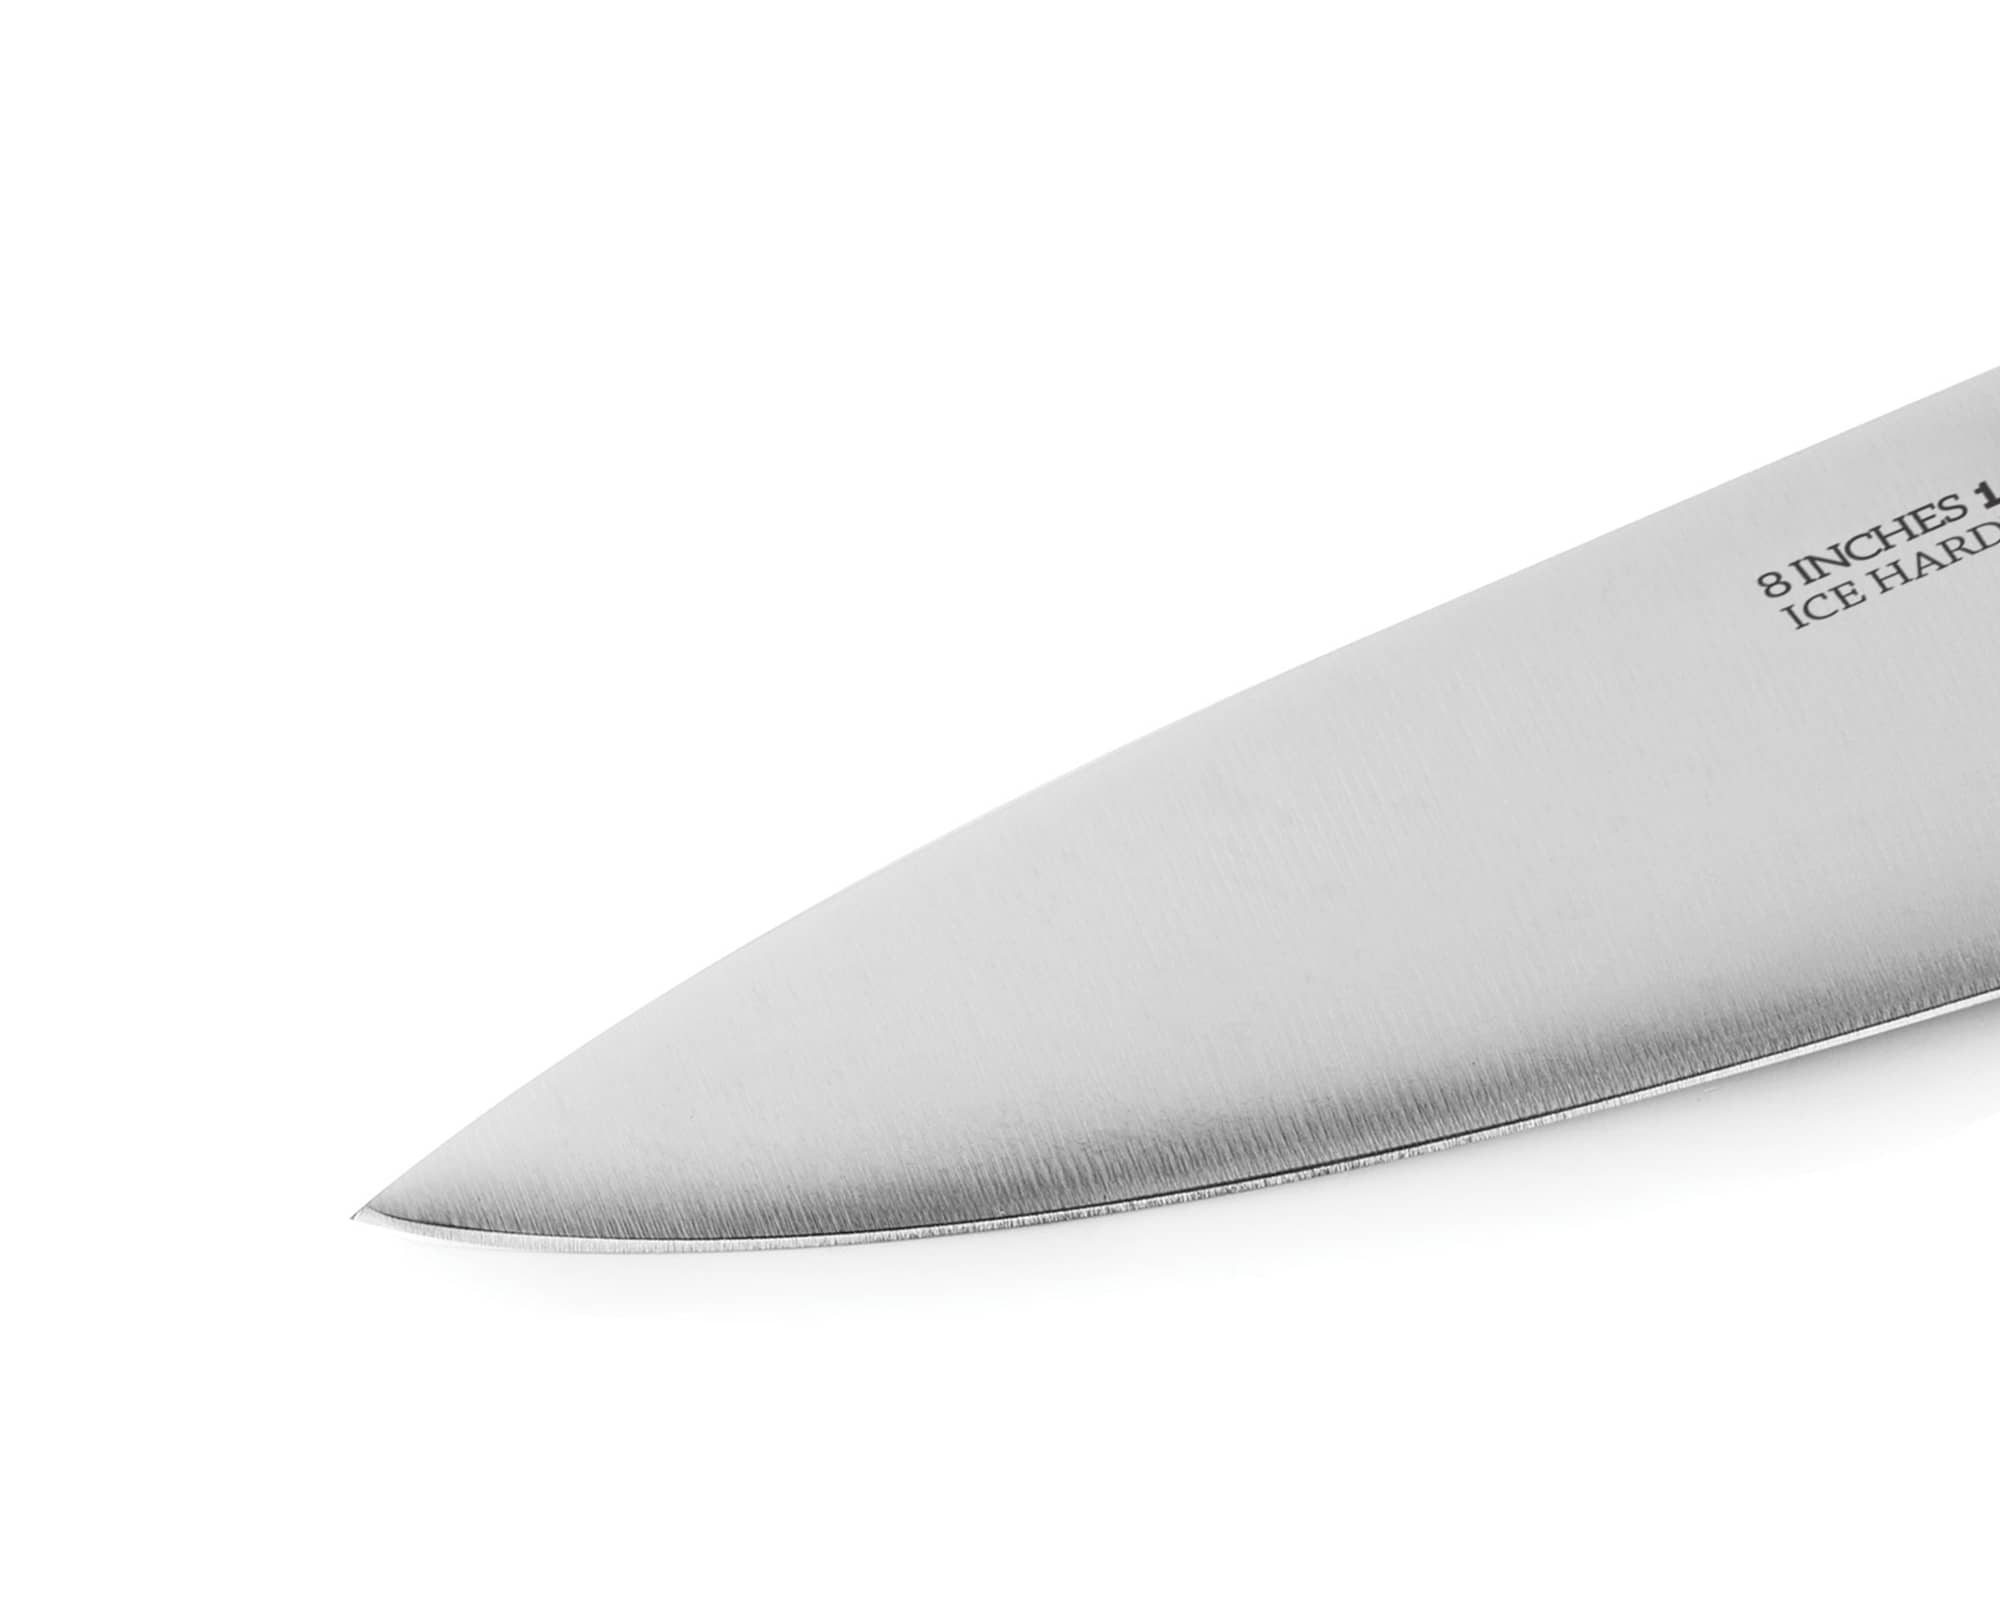 Isolated on the sharp blade crafted to perfection with Professional German Steel of Benchusch Professional 8-Inch Chef Knife